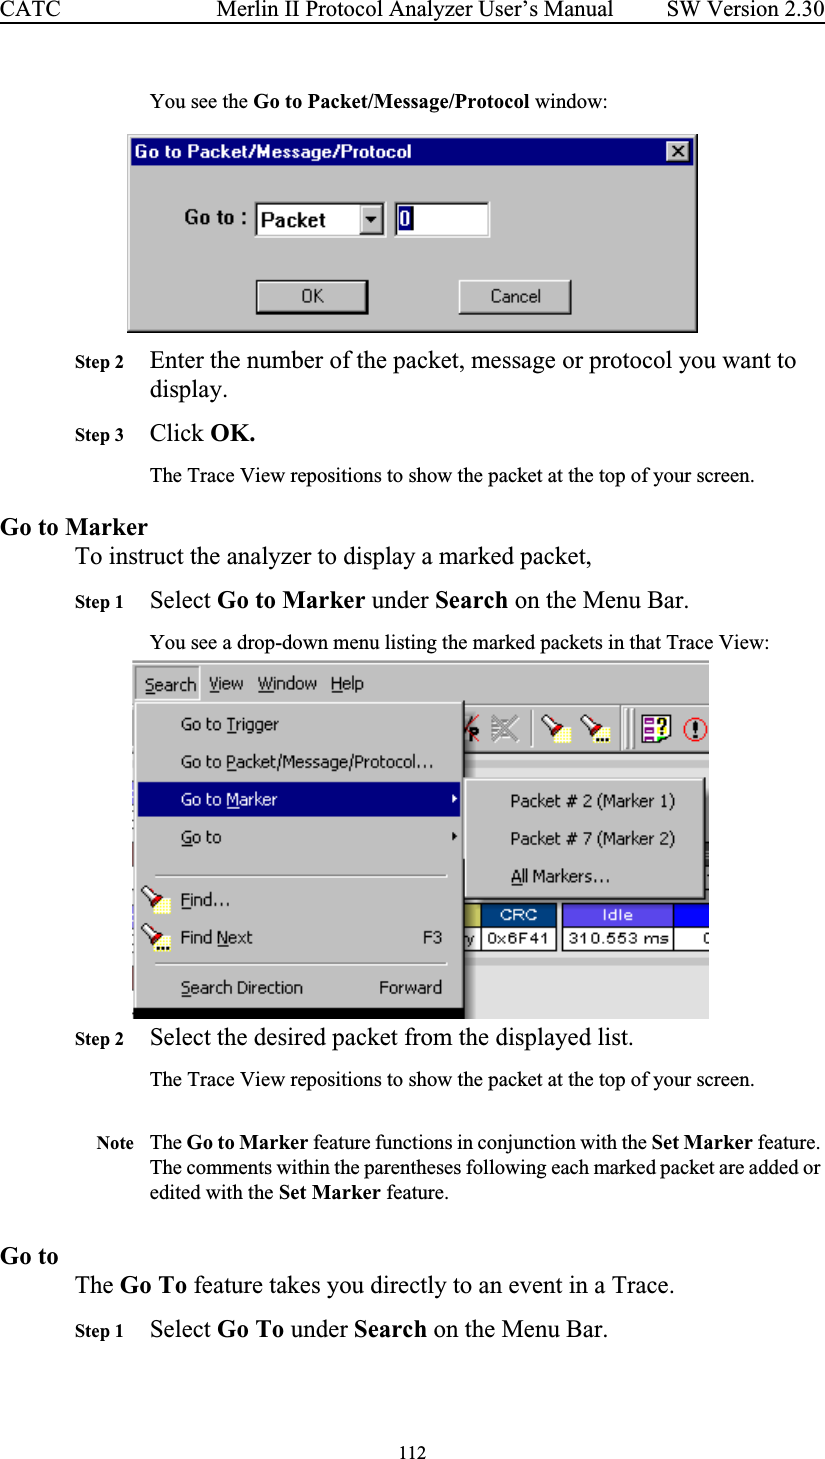 112 Merlin II Protocol Analyzer User’s ManualCATC SW Version 2.30You see the Go to Packet/Message/Protocol window:Step 2 Enter the number of the packet, message or protocol you want to display.Step 3 Click OK.The Trace View repositions to show the packet at the top of your screen.Go to MarkerTo instruct the analyzer to display a marked packet,Step 1 Select Go to Marker under Search on the Menu Bar.You see a drop-down menu listing the marked packets in that Trace View:Step 2 Select the desired packet from the displayed list.The Trace View repositions to show the packet at the top of your screen.Note The Go to Marker feature functions in conjunction with the Set Marker feature. The comments within the parentheses following each marked packet are added or edited with the Set Marker feature. Go toThe Go To feature takes you directly to an event in a Trace.Step 1 Select Go To under Search on the Menu Bar.